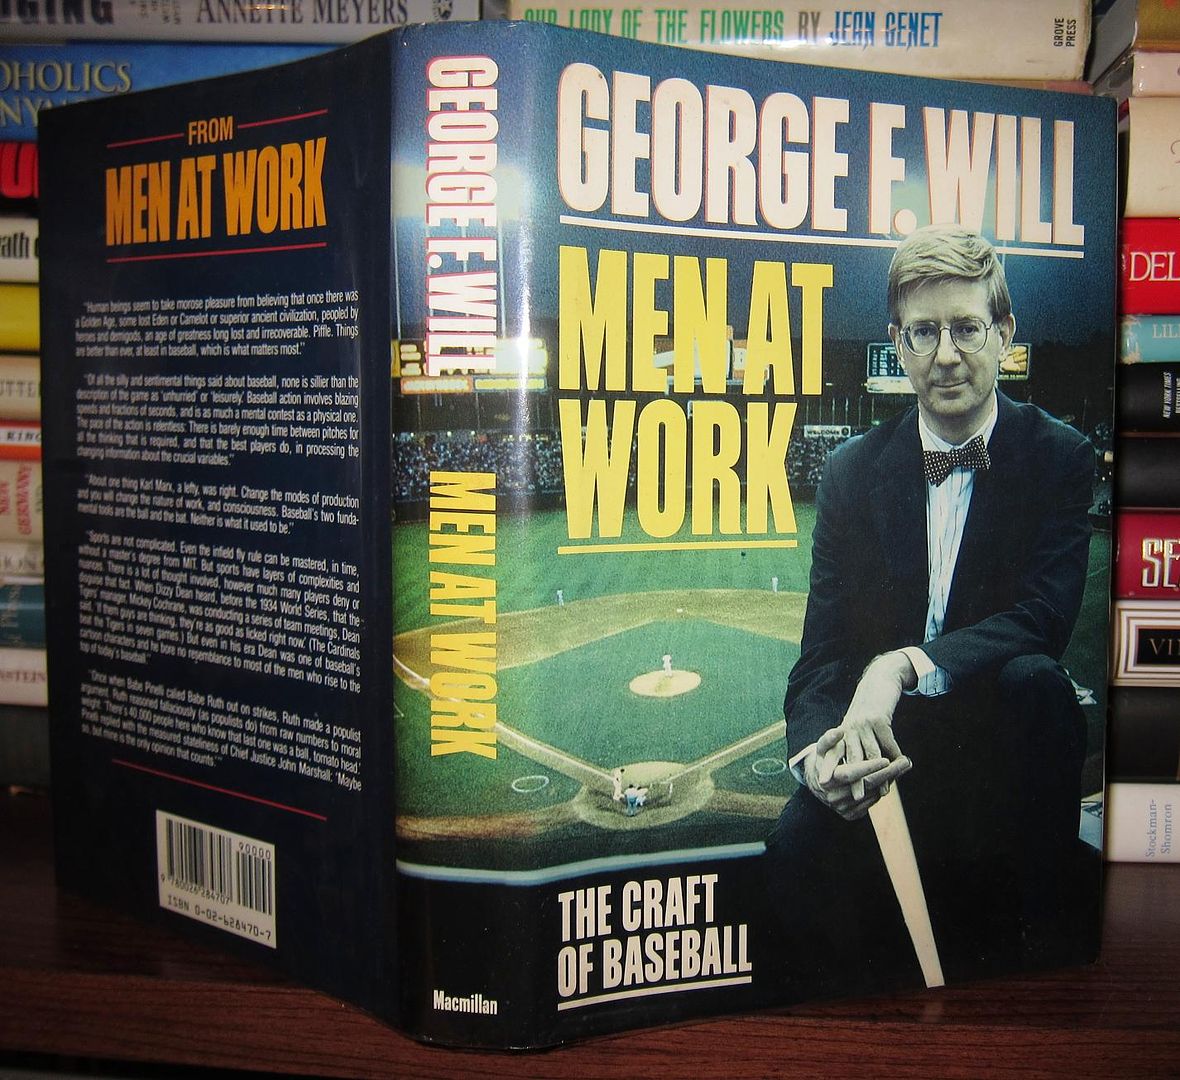 WILL, GEORGE F. - Men at Work the Craft of Baseball